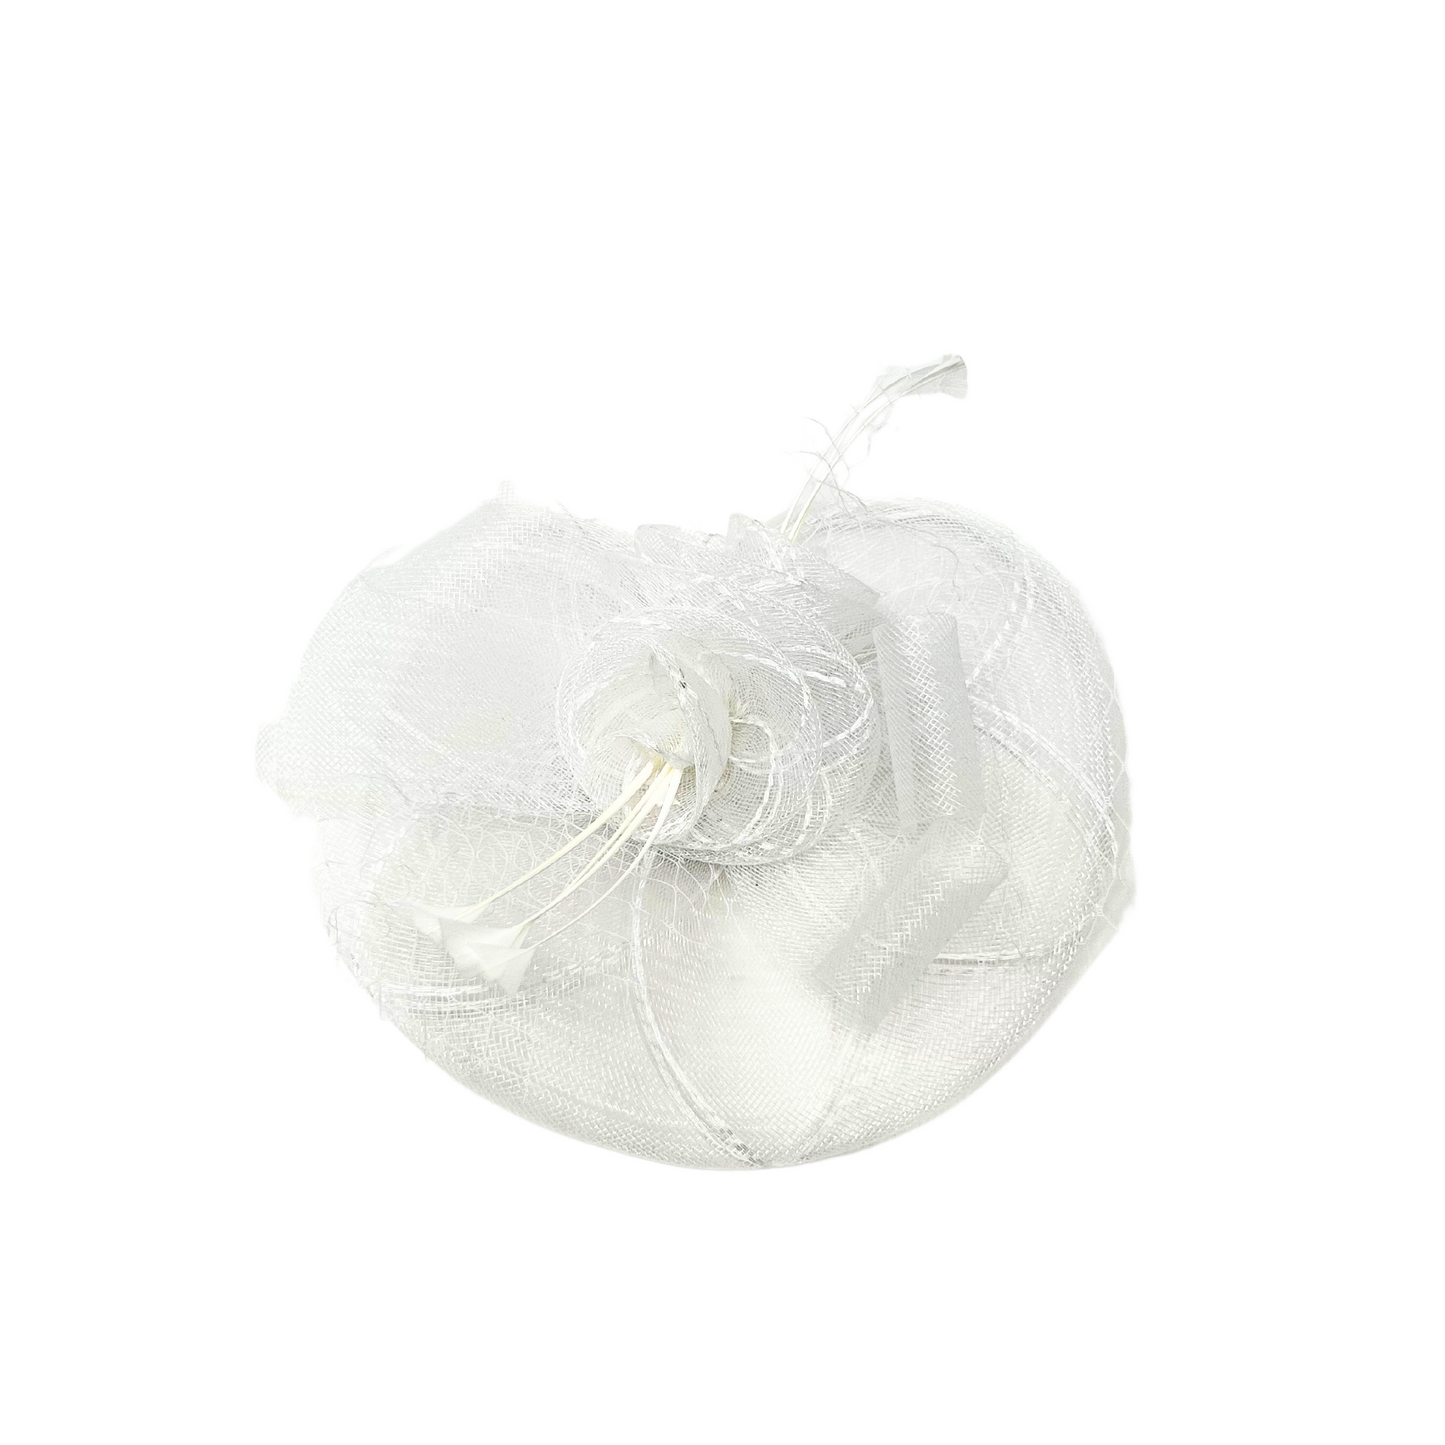 Fascinator Netted Disk With Hairband and Hair Clip